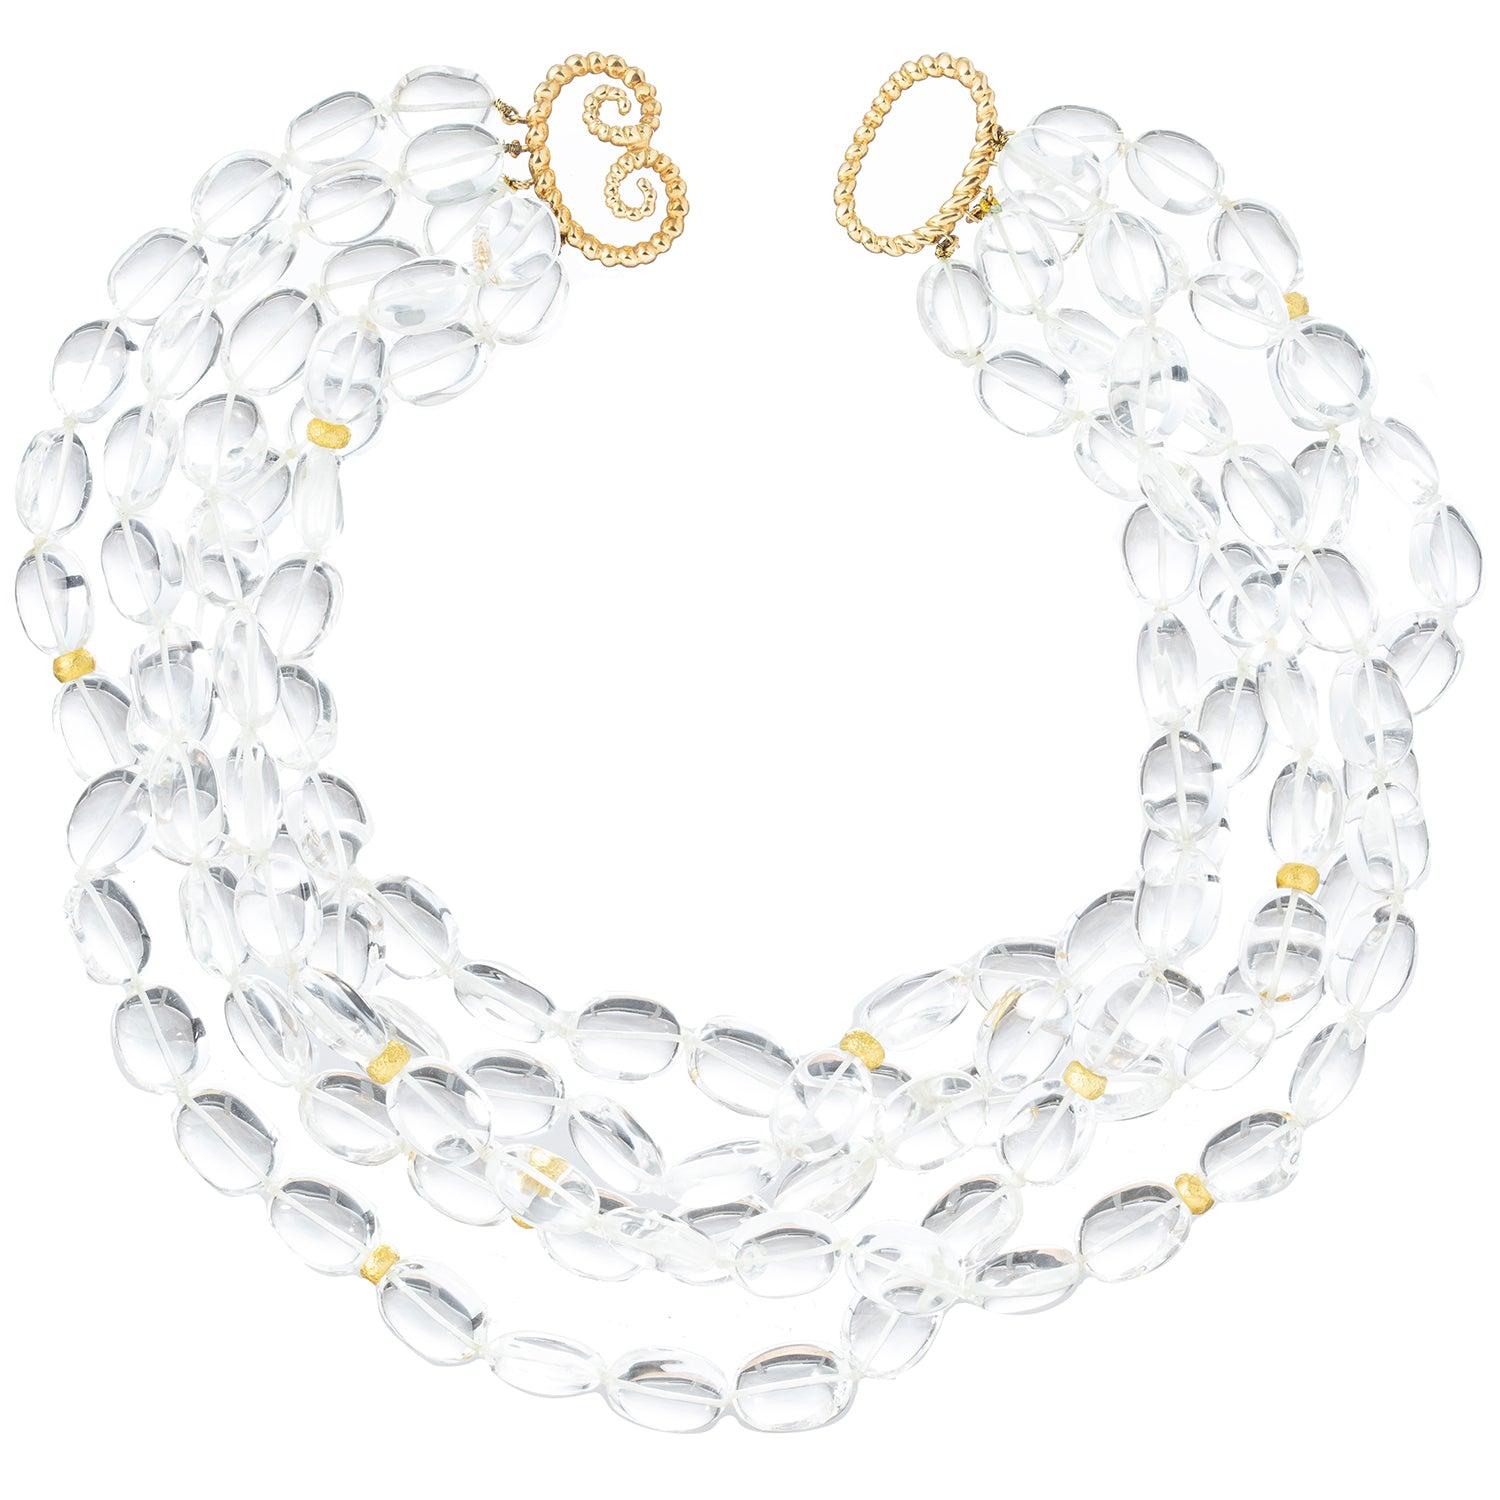 Exquisite five-strand bead 'Torsade' necklace by Verdura, featuring oval, polished, colorless rock crystal beads with two 18k yellow gold beads on each. Each strand of shimmering rock crystal quartz is delicately handcrafted, creating a captivating